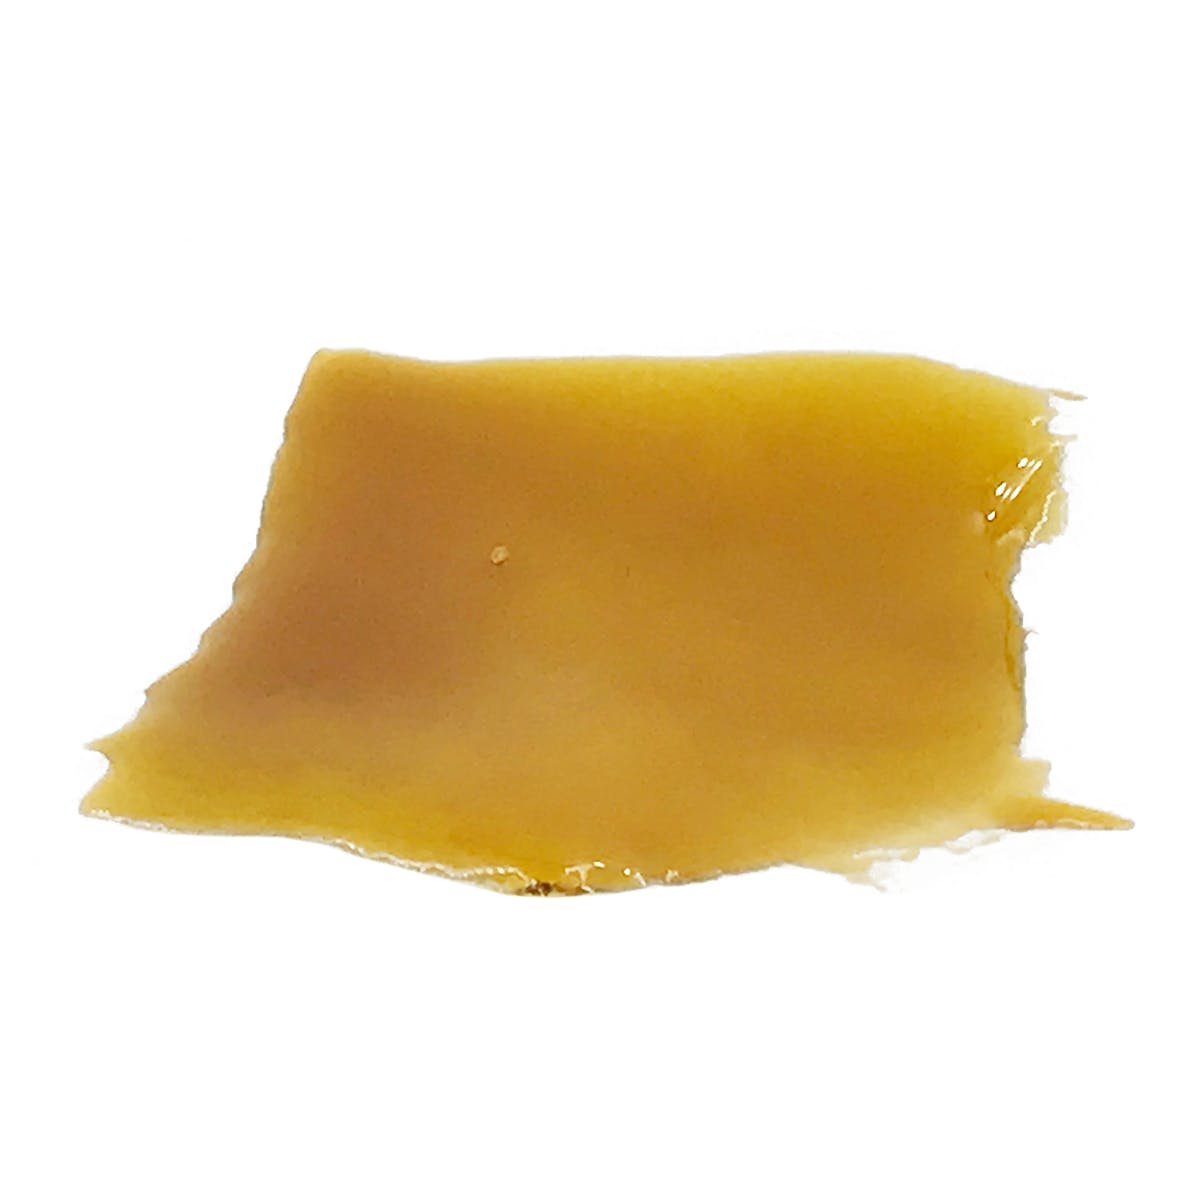 concentrate-white-label-extracts-wifi-og-shatter